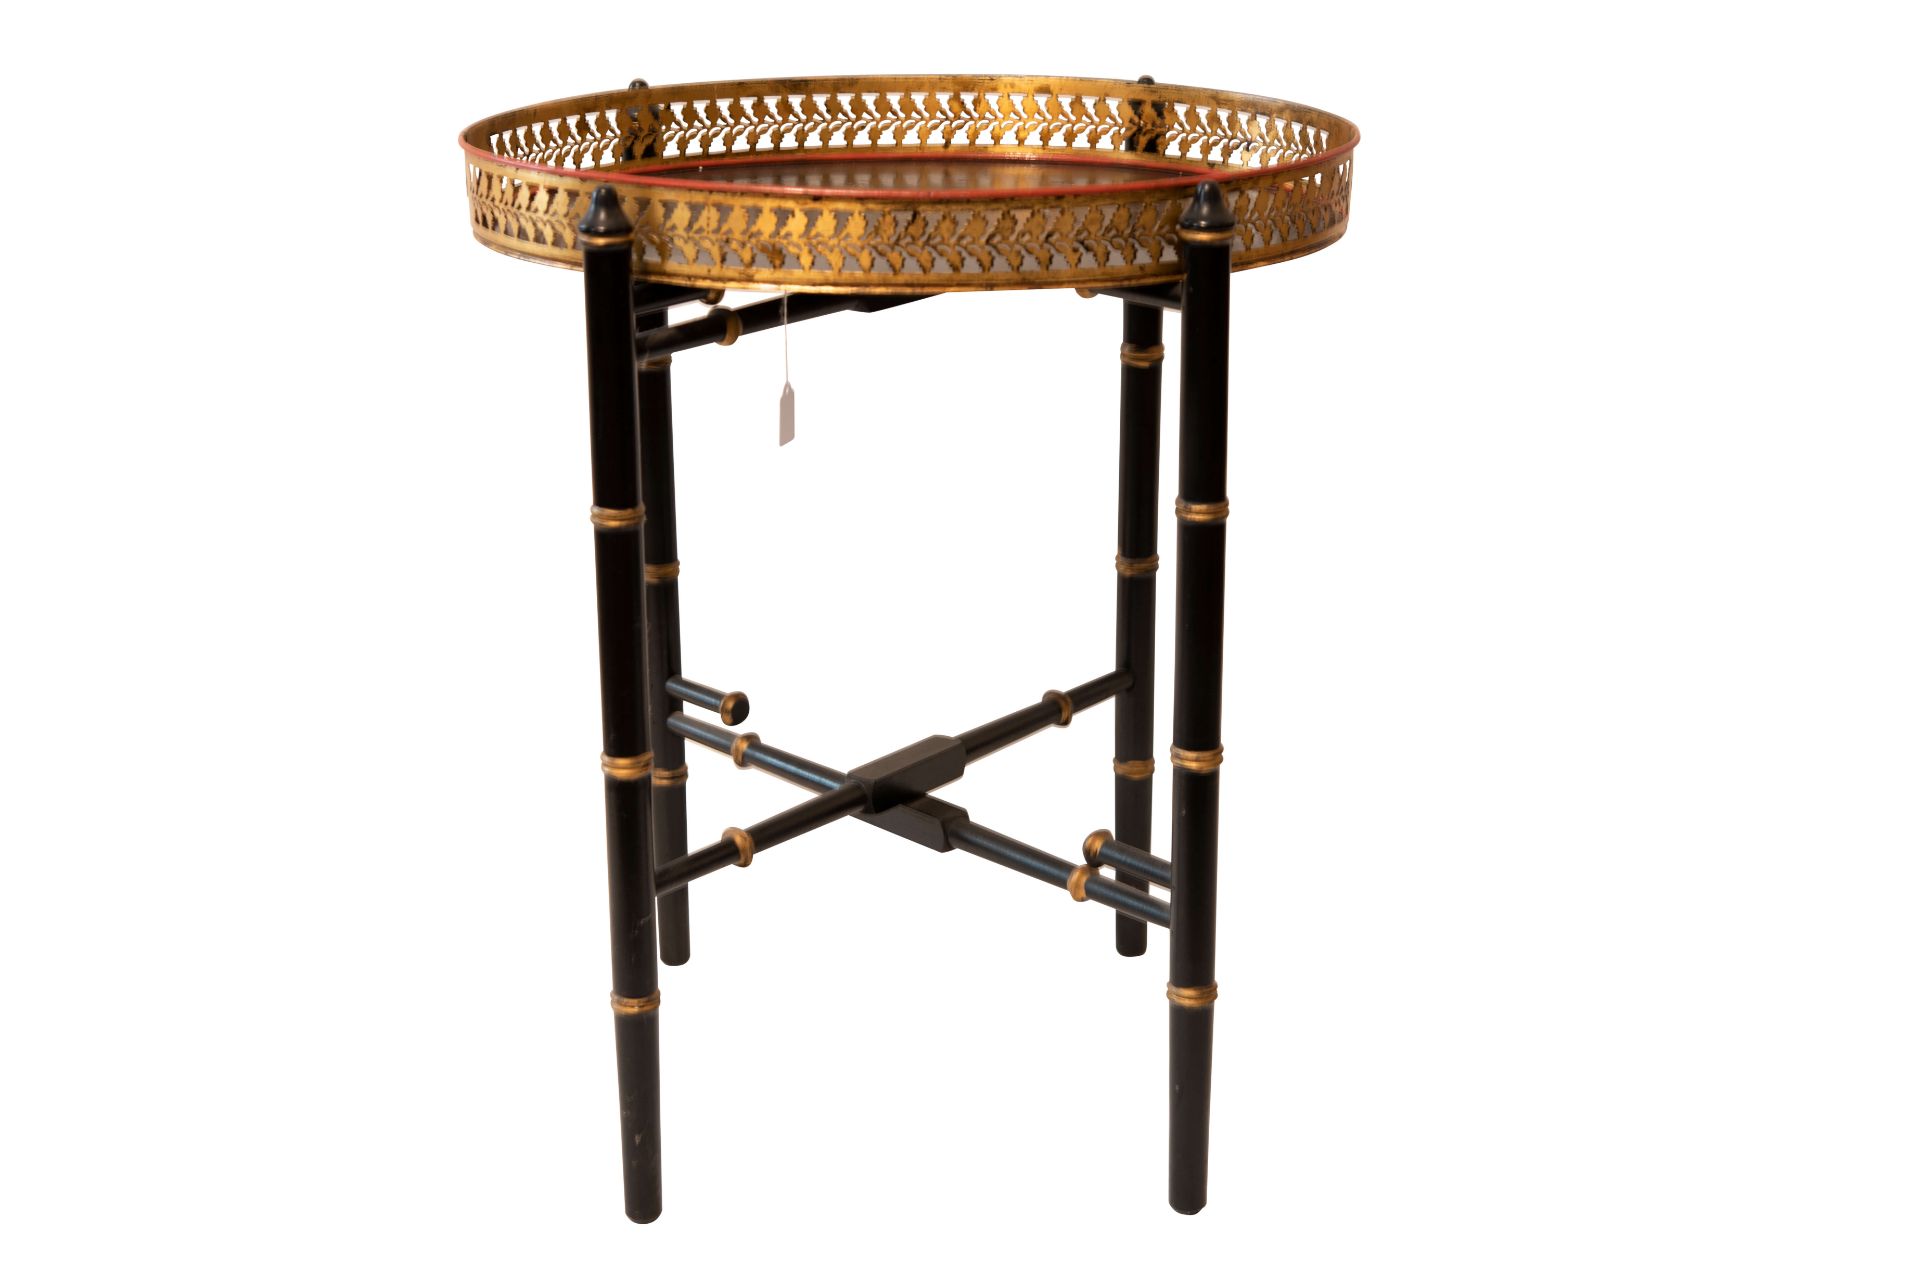 Asiatischer Tisch mit abnehmbarer Servier Platte | Asian Table with Removable Serving Tray - Image 2 of 5